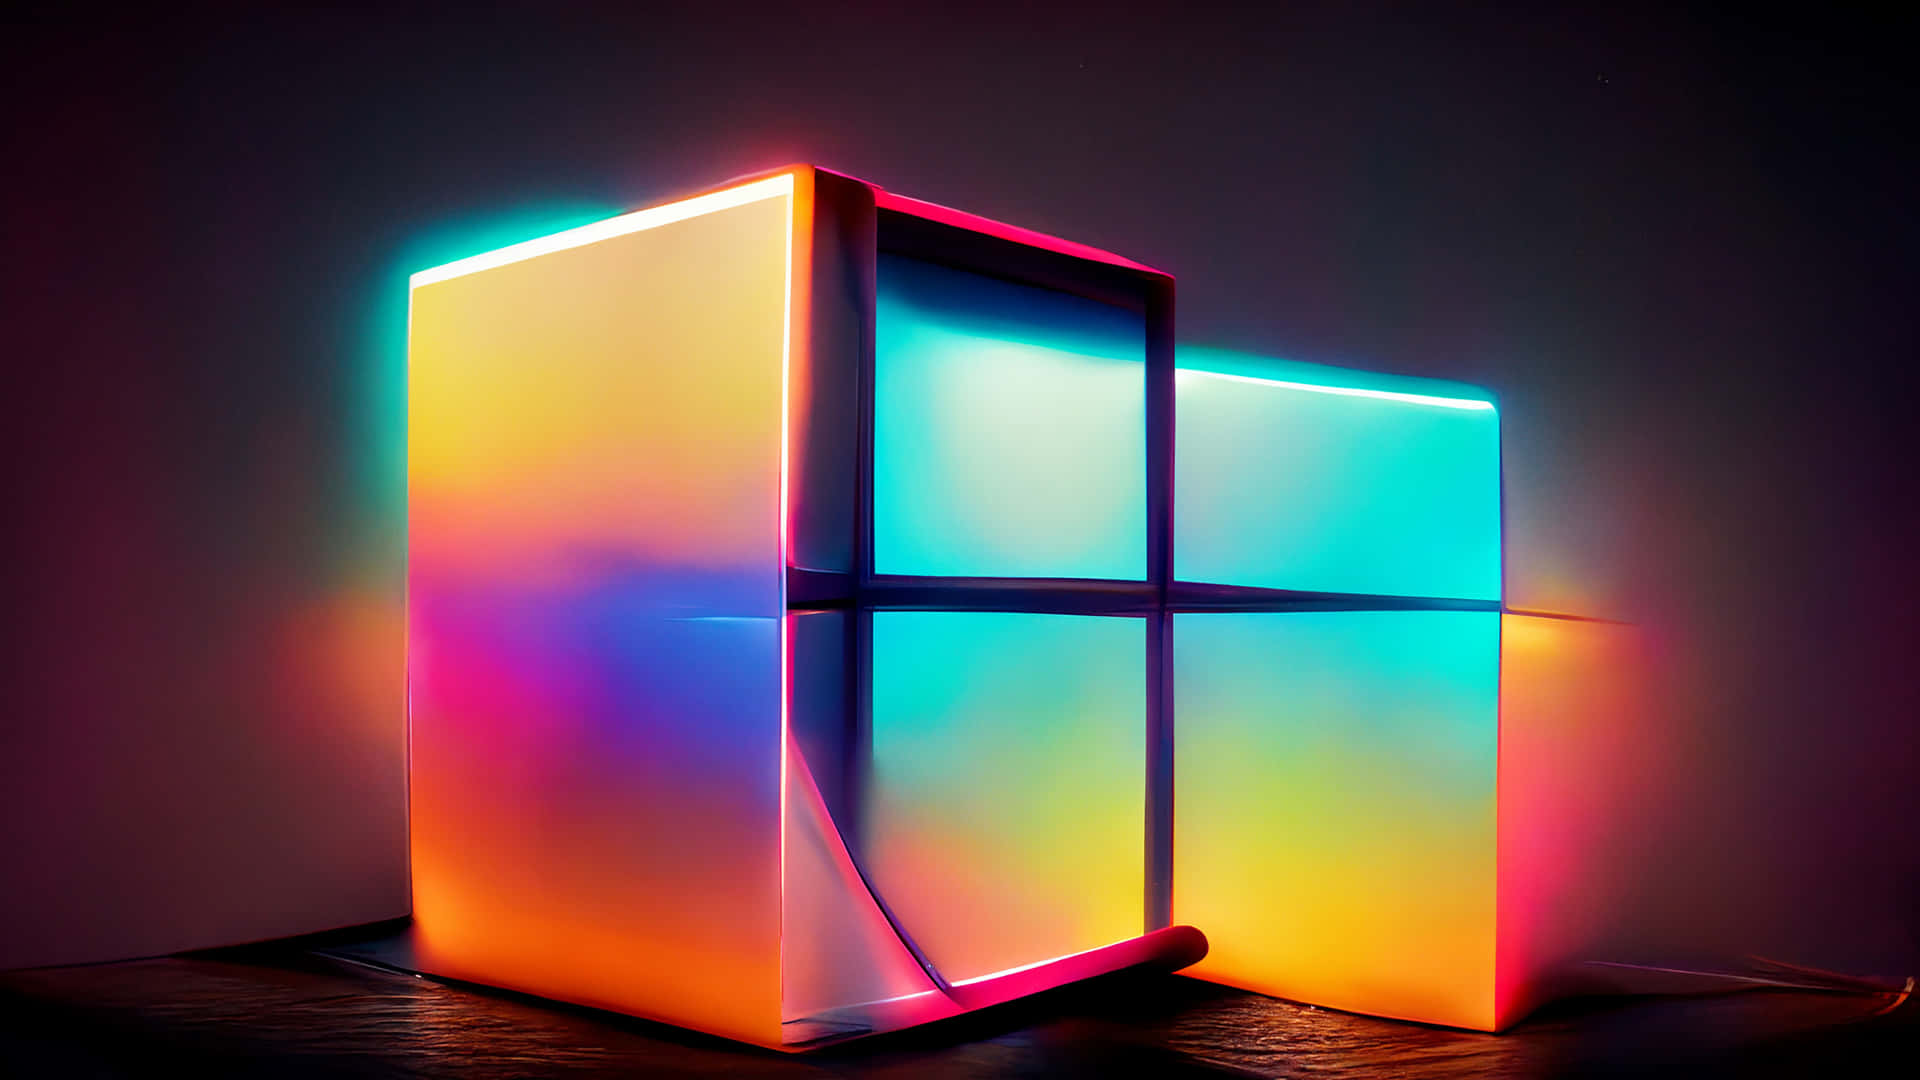 Multicolored Abstract Windows Logo Background